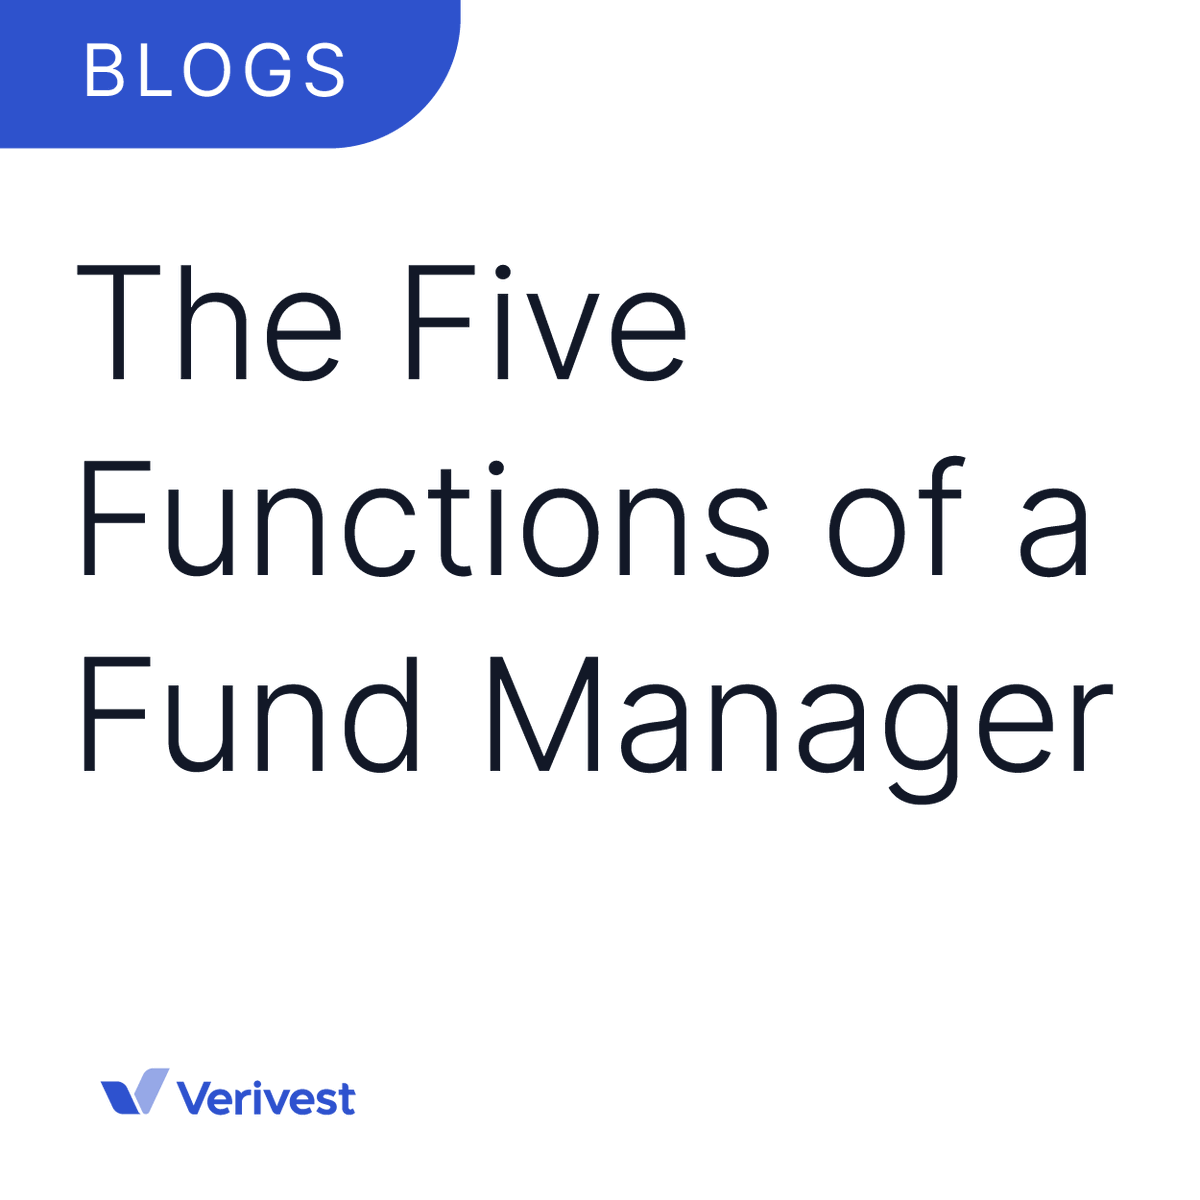 We believe effective fund managers excel in 5 key areas: Origination, Underwriting, Asset Management, Fund Administration, and Capital Raising. hubs.li/Q02wmlQW0
#FundManager #FundManagement #Verivest